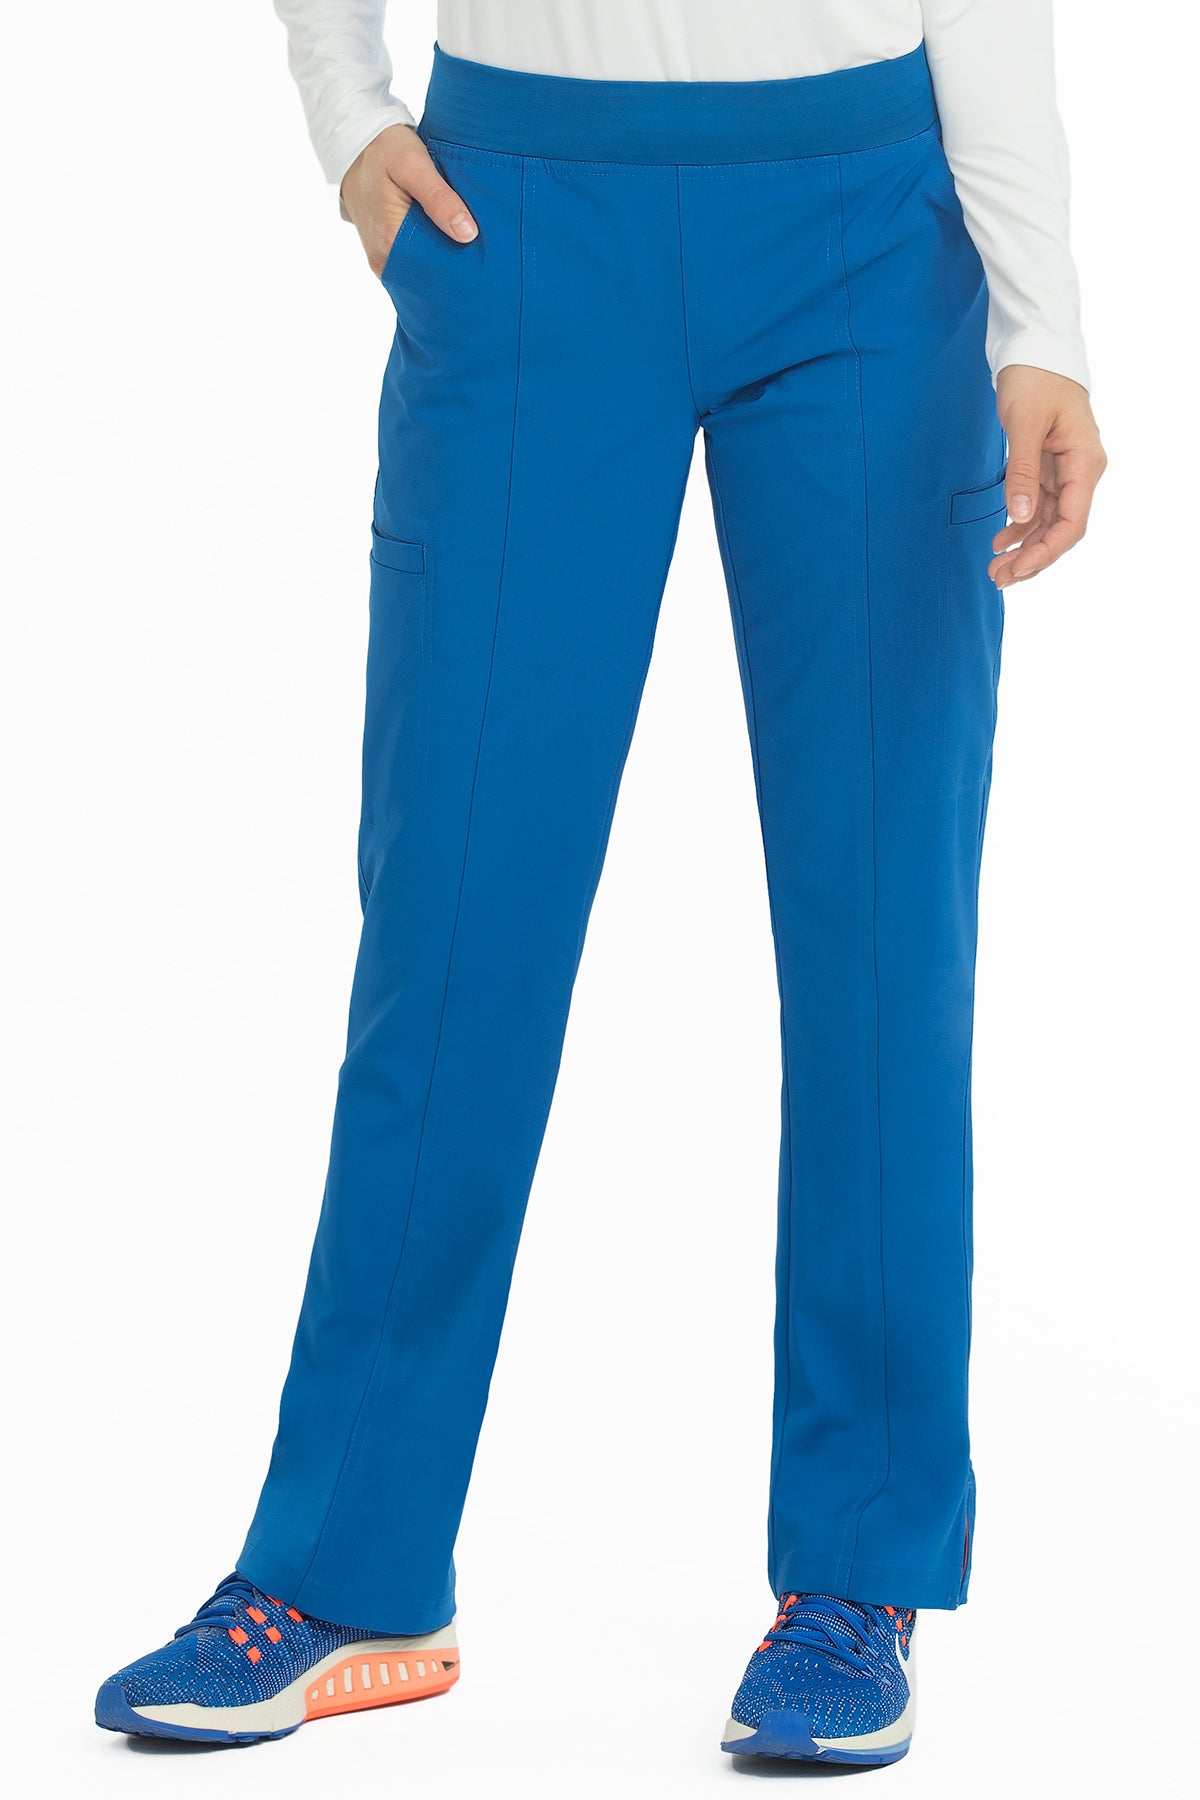 Yoga 2 Cargo Pocket Pant by Med Couture (Tall) XS-5XL / Royal